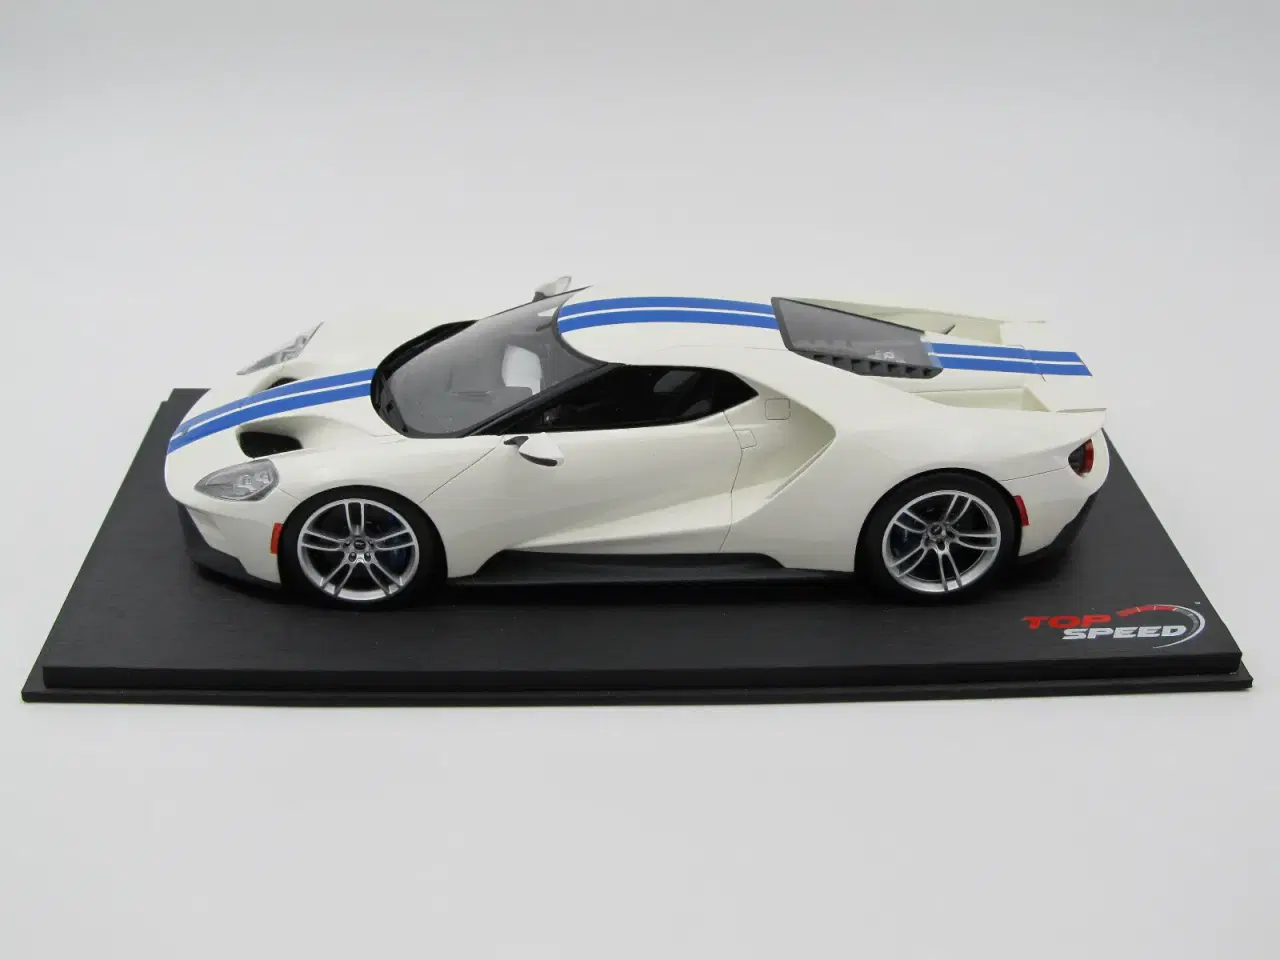 Billede 3 - 2016 Ford GT Shelby Limited Edition - 1:18